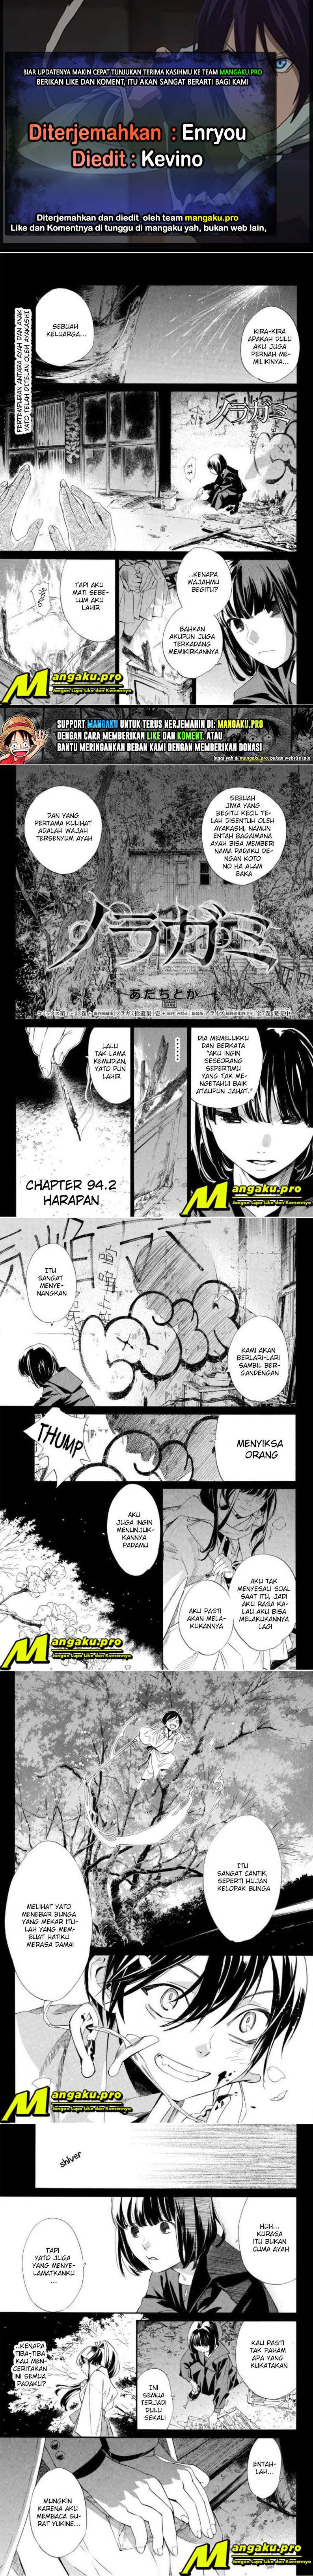 Noragami Chapter 94.2